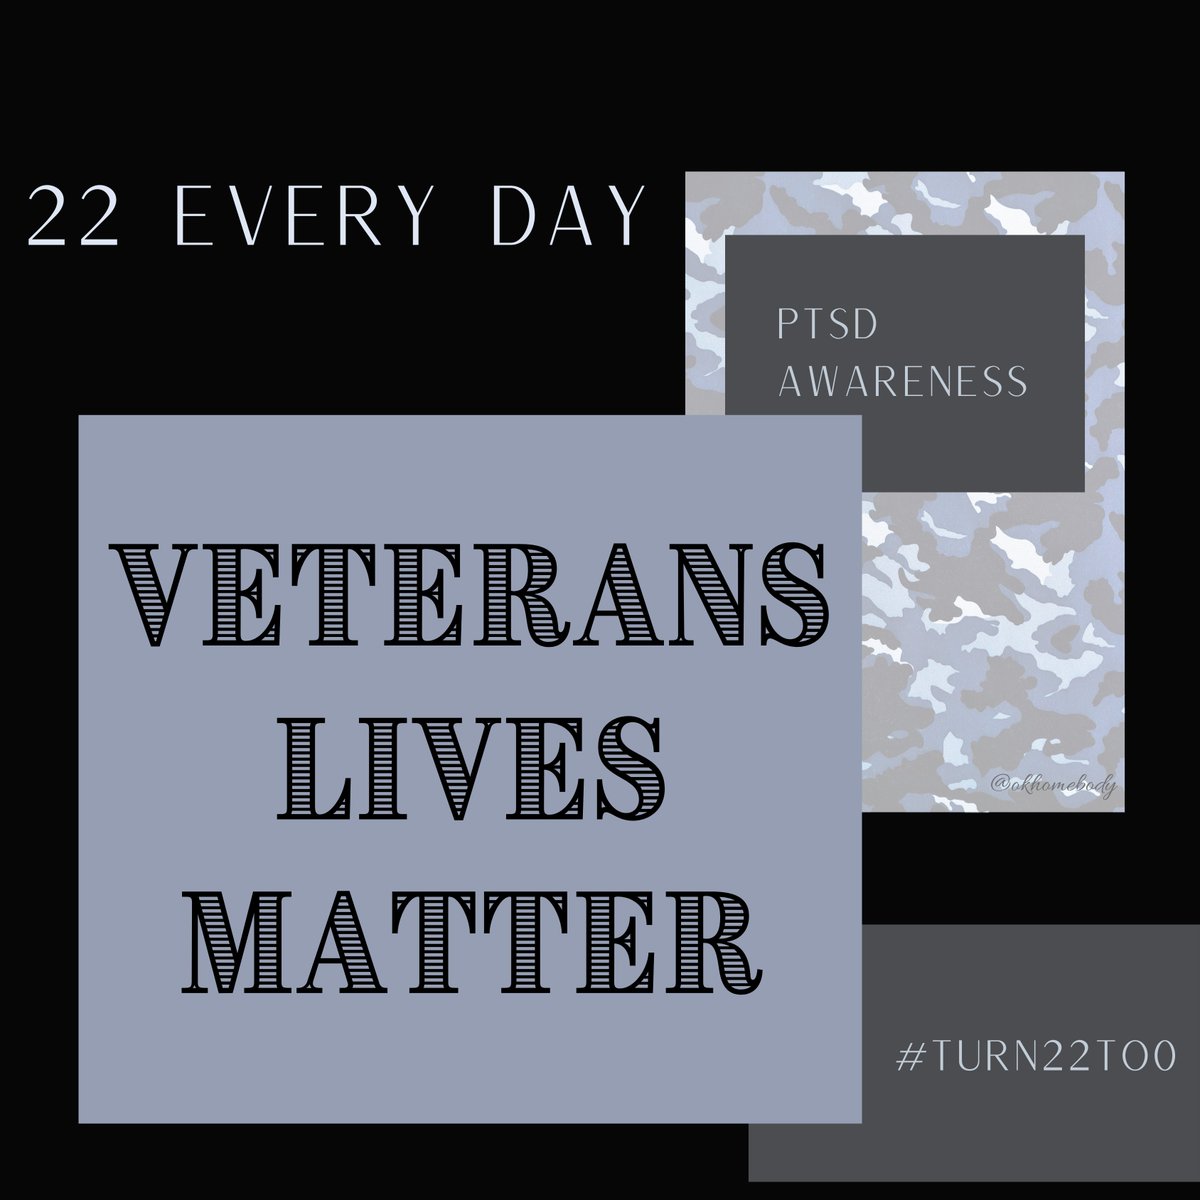 🇺🇸 #ThoughtfulTuesday #Buddy✅with #Veterans 🙏RH ❤️#VeteransLivesMatter #Turn22to0❤️ ⭐️ 🇺🇸 Repost #EndVeteranSuicide #dial988press1 🇺🇸⭐️ 🇺🇸@Mike04091780 @roll_tide74 @Ohiogabulldog ✈️ 🇺🇸@Sean93061307 @RandyBelcher57 @FrizzTm @P_FFlyers✈️ 🇺🇸@MikeGoodlander @JStancoff